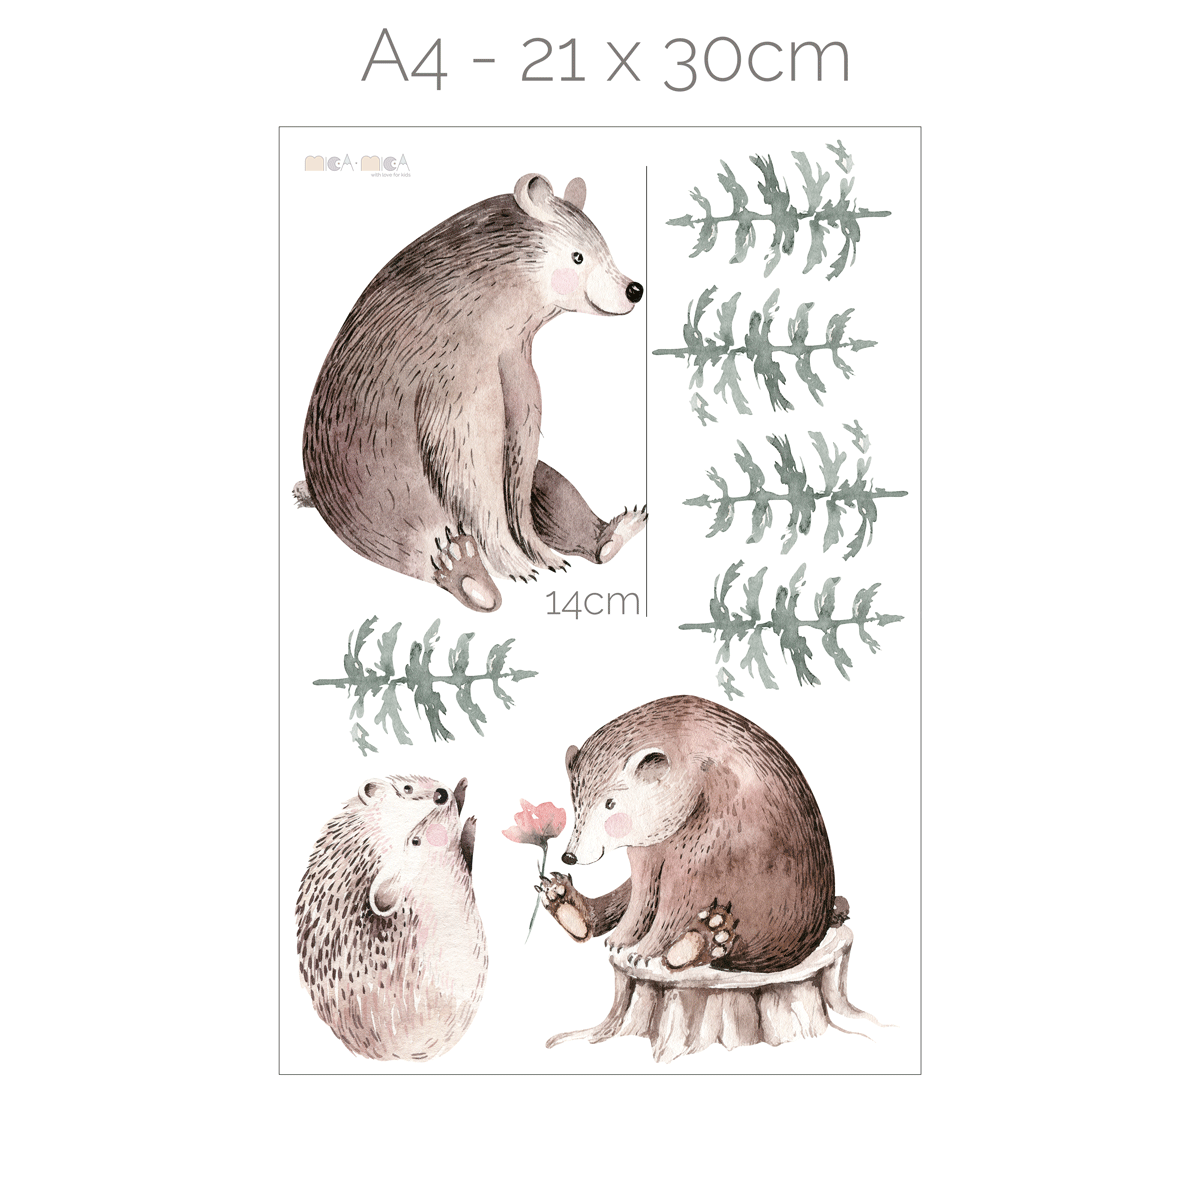 Woodland wall stickers - Bears in the woods